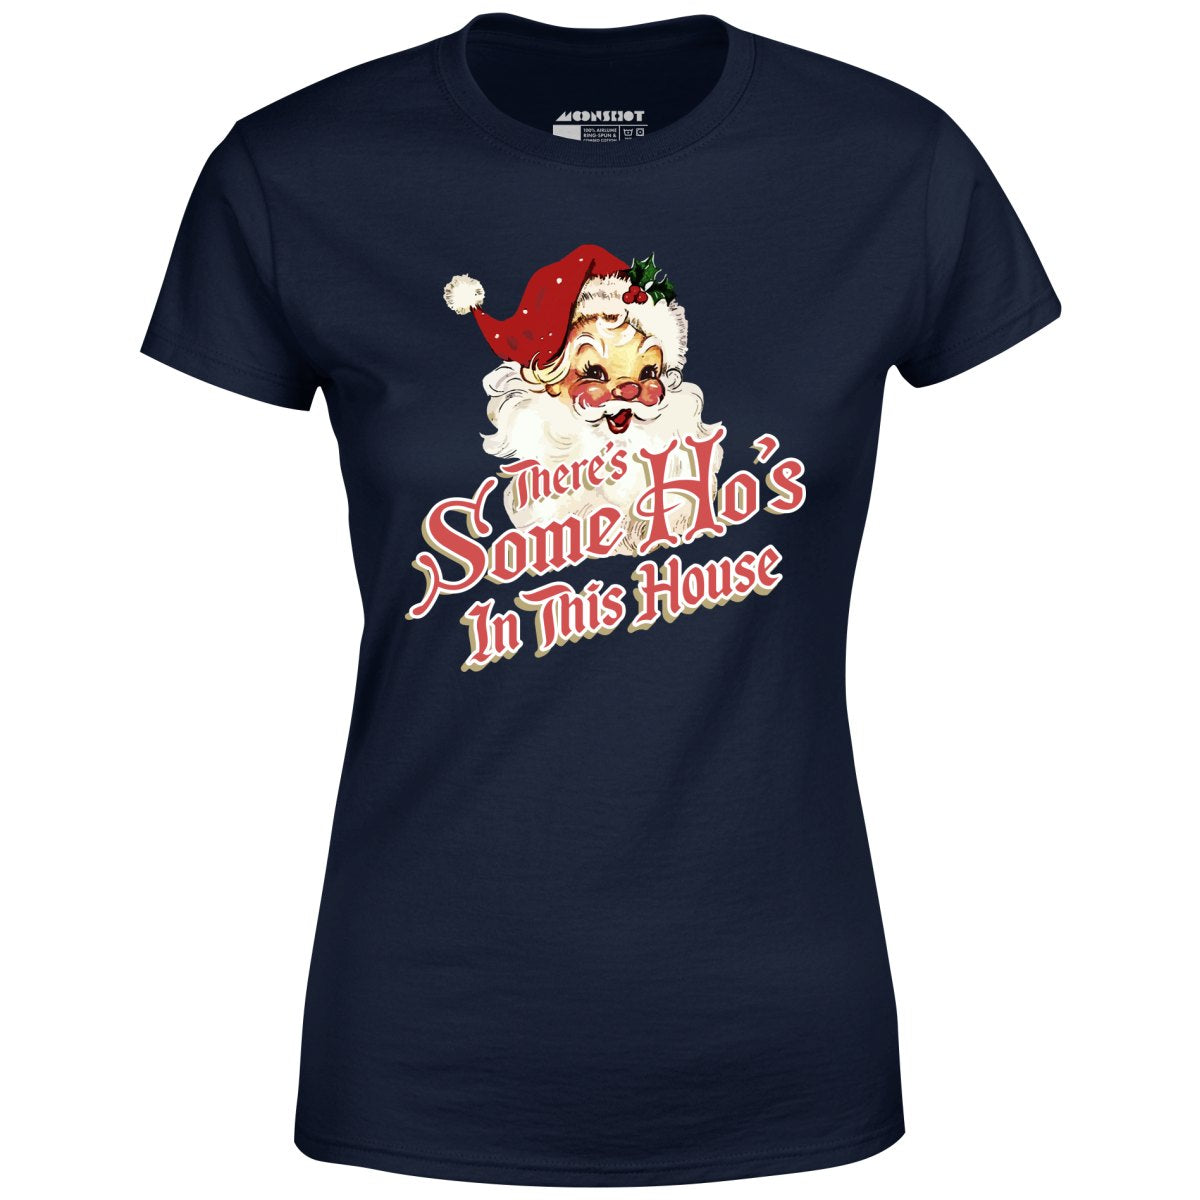 There's Some Ho's in this House - Women's T-Shirt